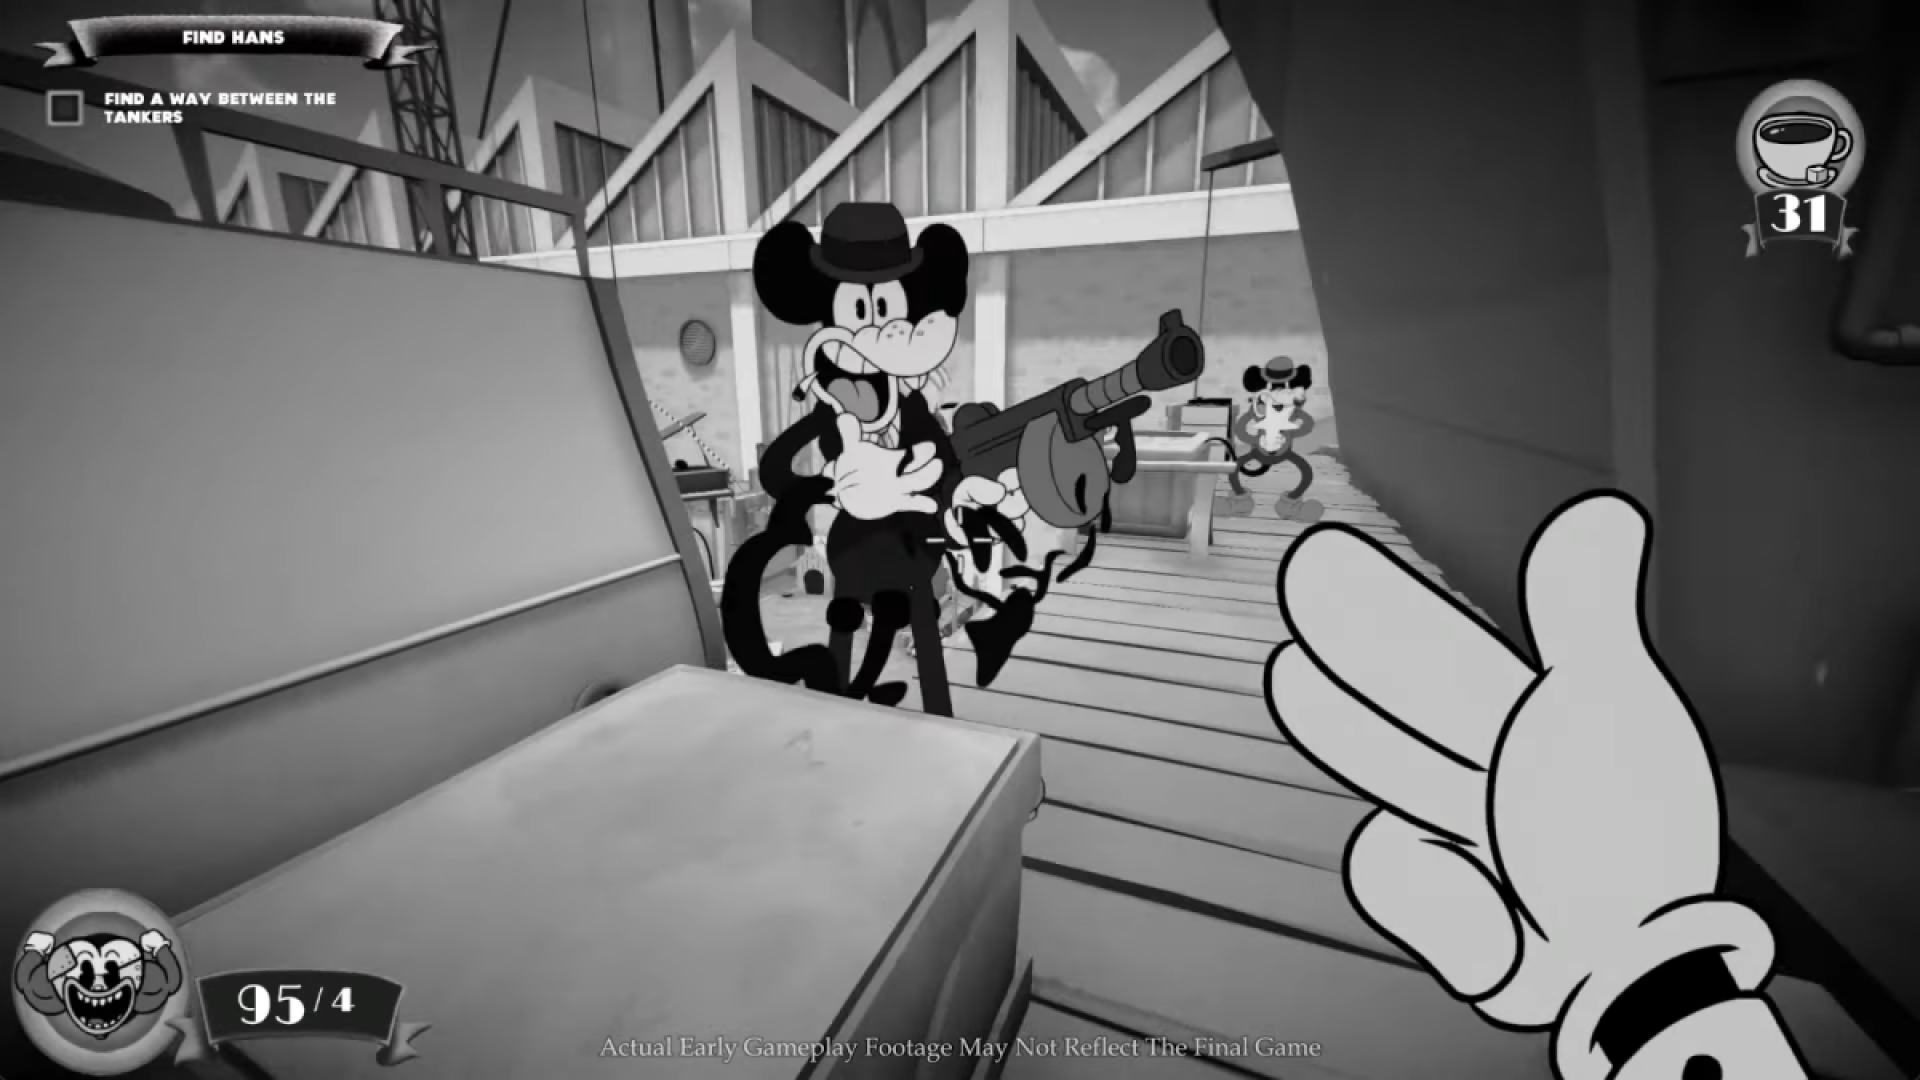 Shooting with finger guns at the dock in "Mouse" teaser, test footage. 